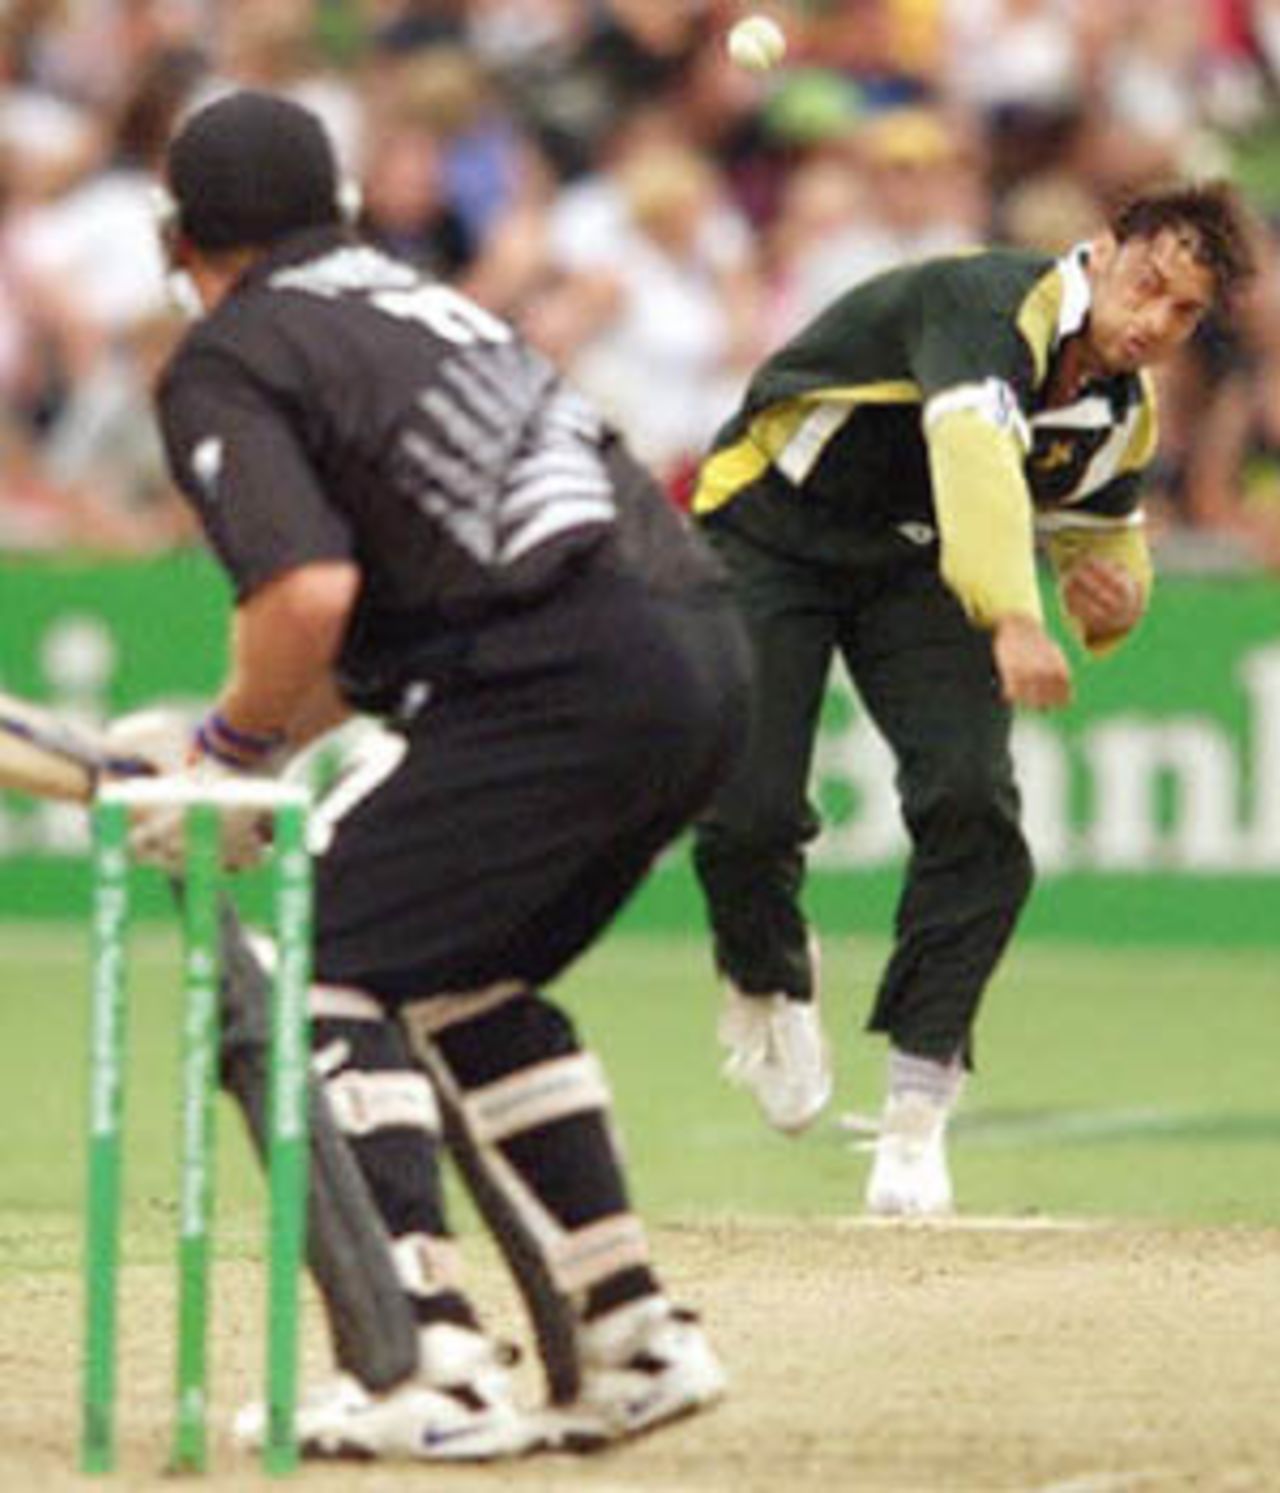 Pakistan paceman Shoaib Akhtar (R) sends down a thunder bolt to New Zealand batsman Roger Twose (L) before limping off with a strained muscle as New Zealand defeats Pakistan in the second one day match played in Napier 20 February 2001. Pakistan struggled to 135 from their 50 overs on a seaming wicket with New Zealand cruising to victory with six wickets in hand to level the series 1-1.